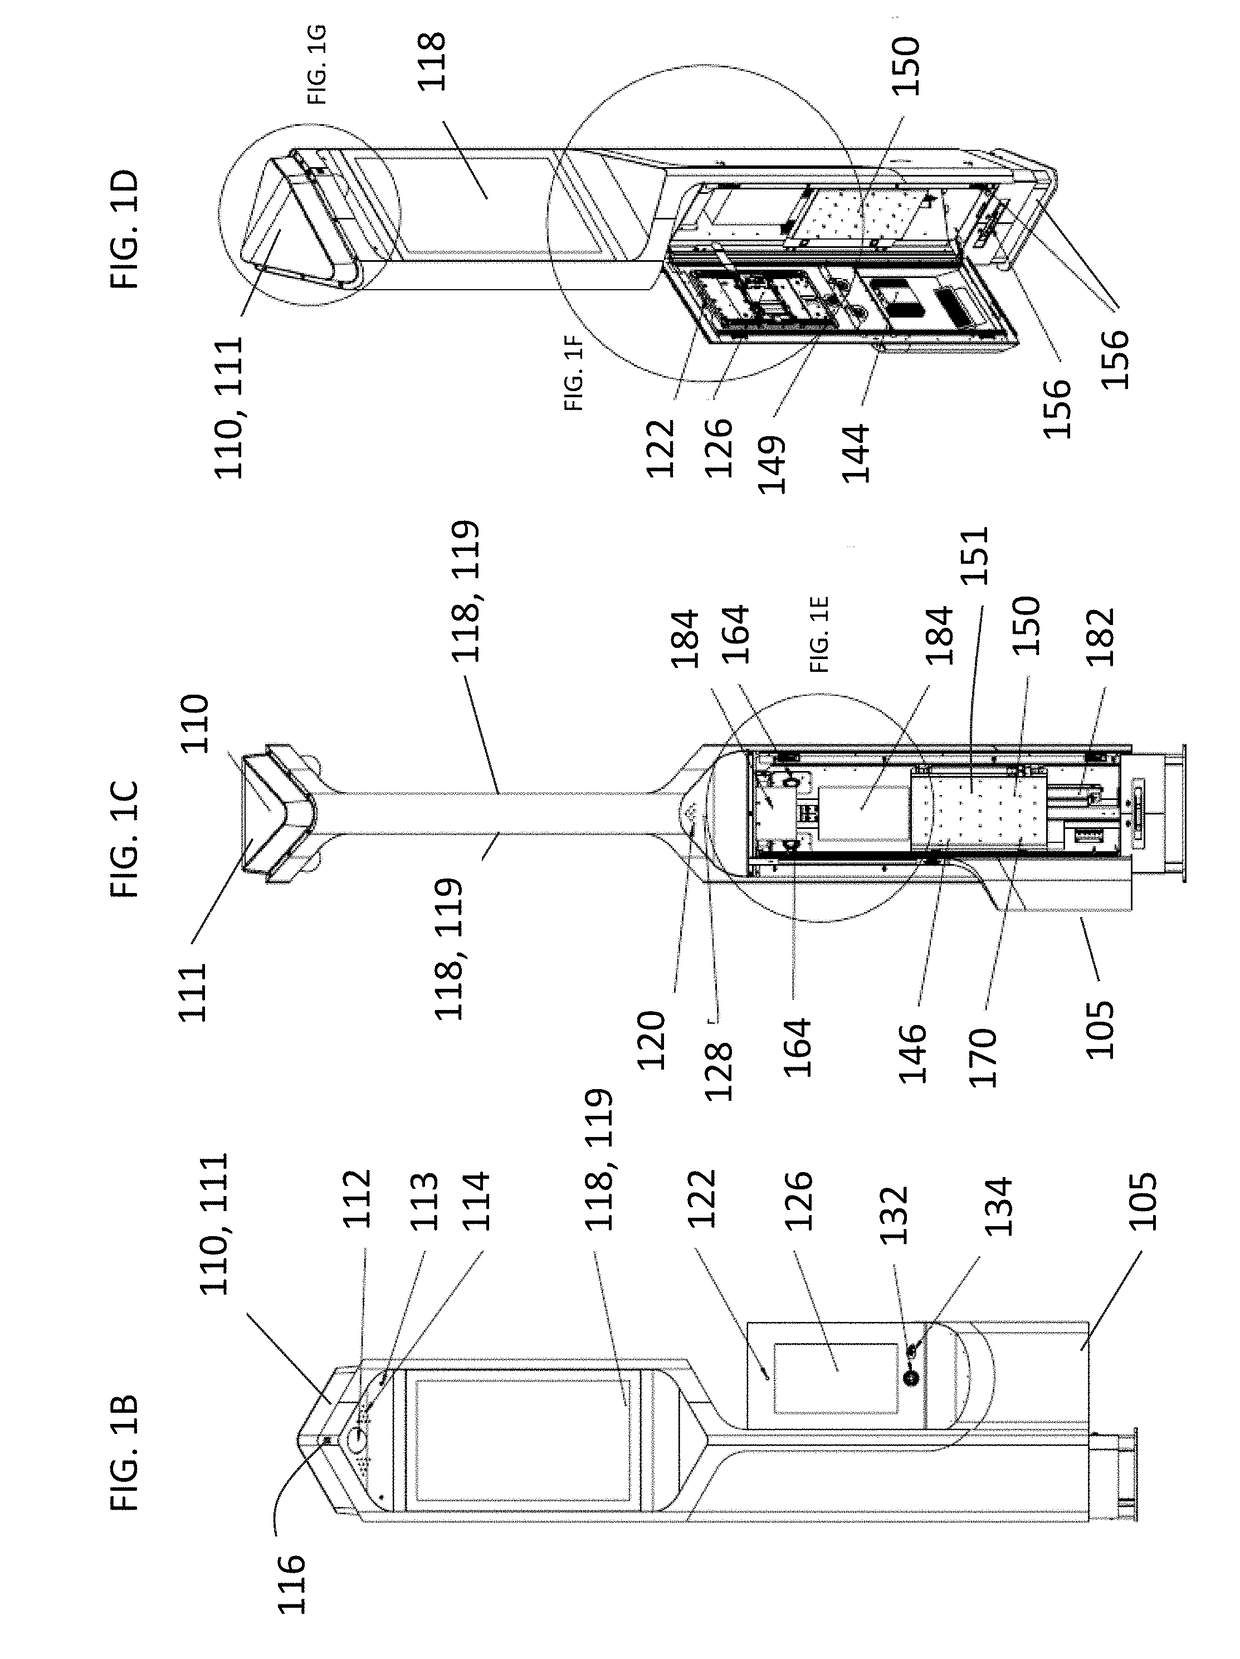 Multifunctional interactive beacon with mobile device interaction